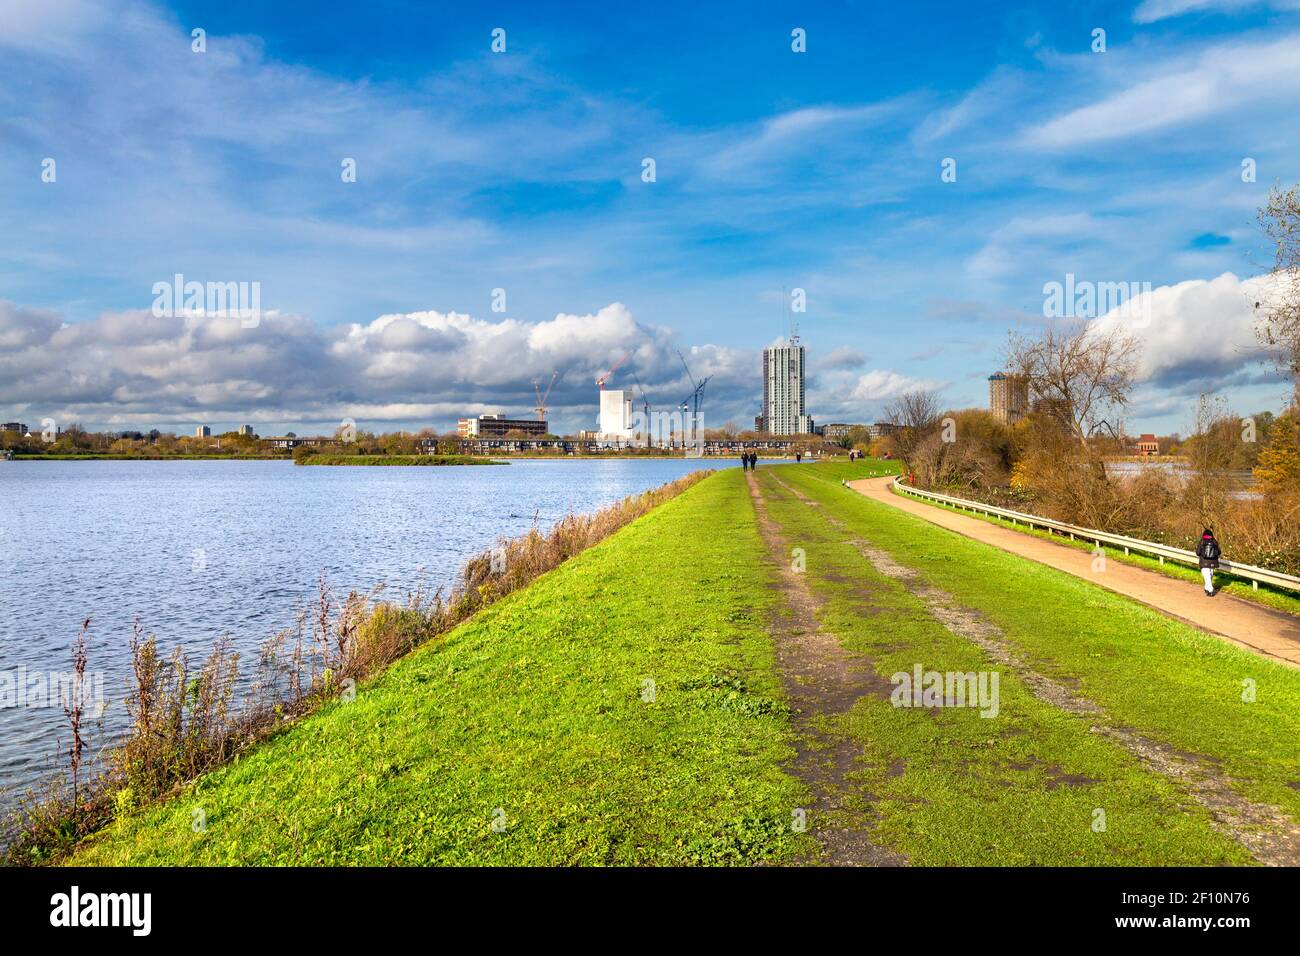 East Warwick Reservoir, Walthamstow Wetlands, Lea Valley Country Park, Londres, Royaume-Uni Banque D'Images